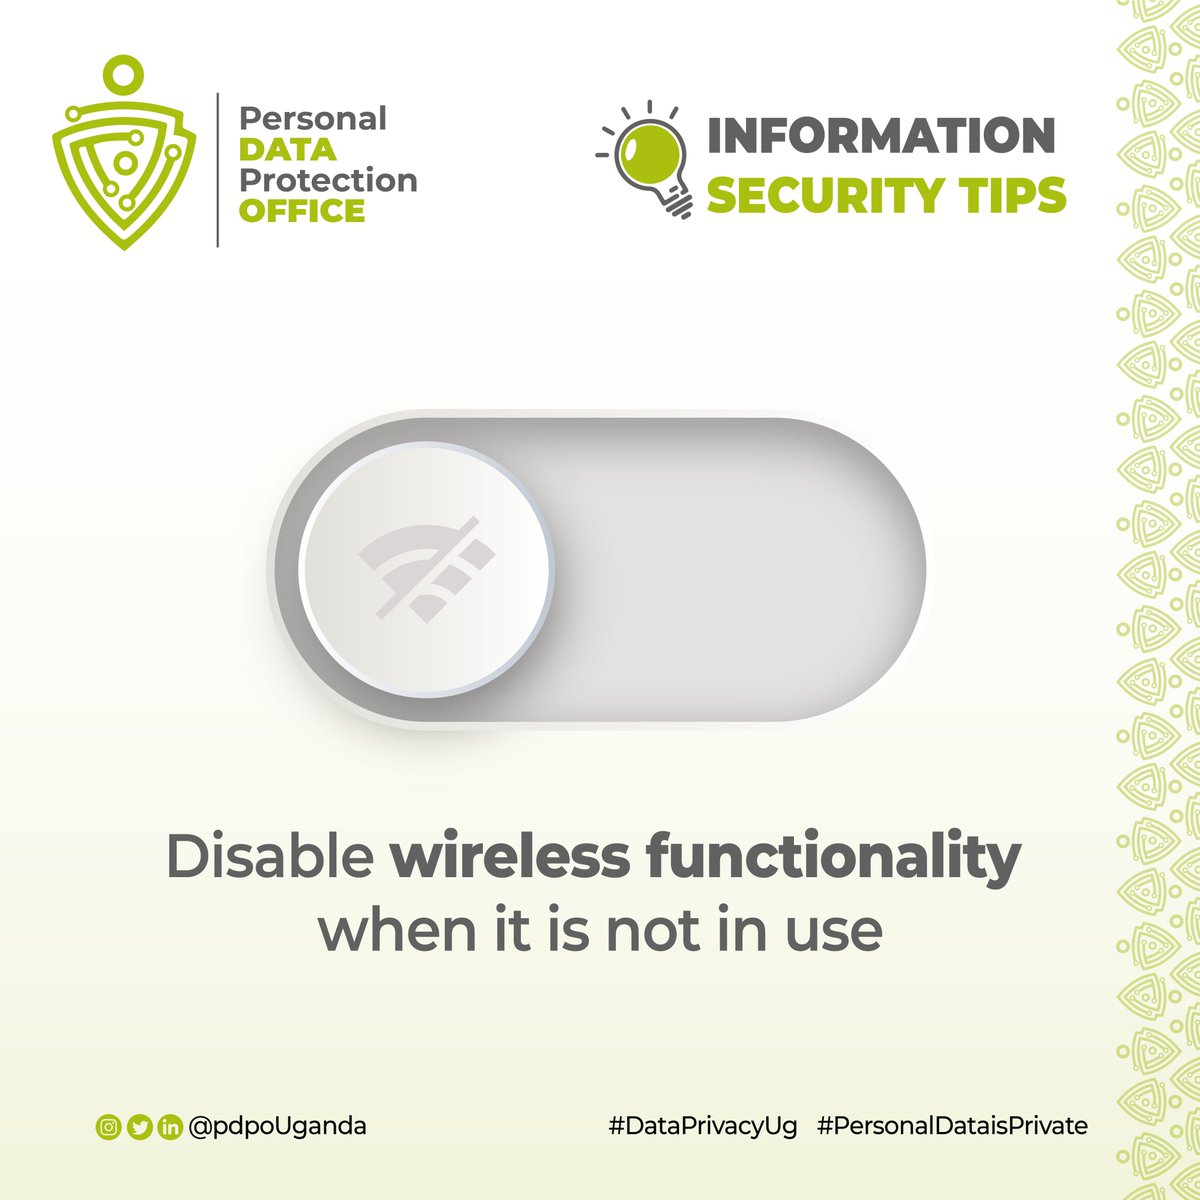 Protect your personal data by disabling wireless functionality when not in use. It's a simple step to safeguard your privacy and prevent unauthorized access. #PersonalDataisPrivate #DataPrivacyUG